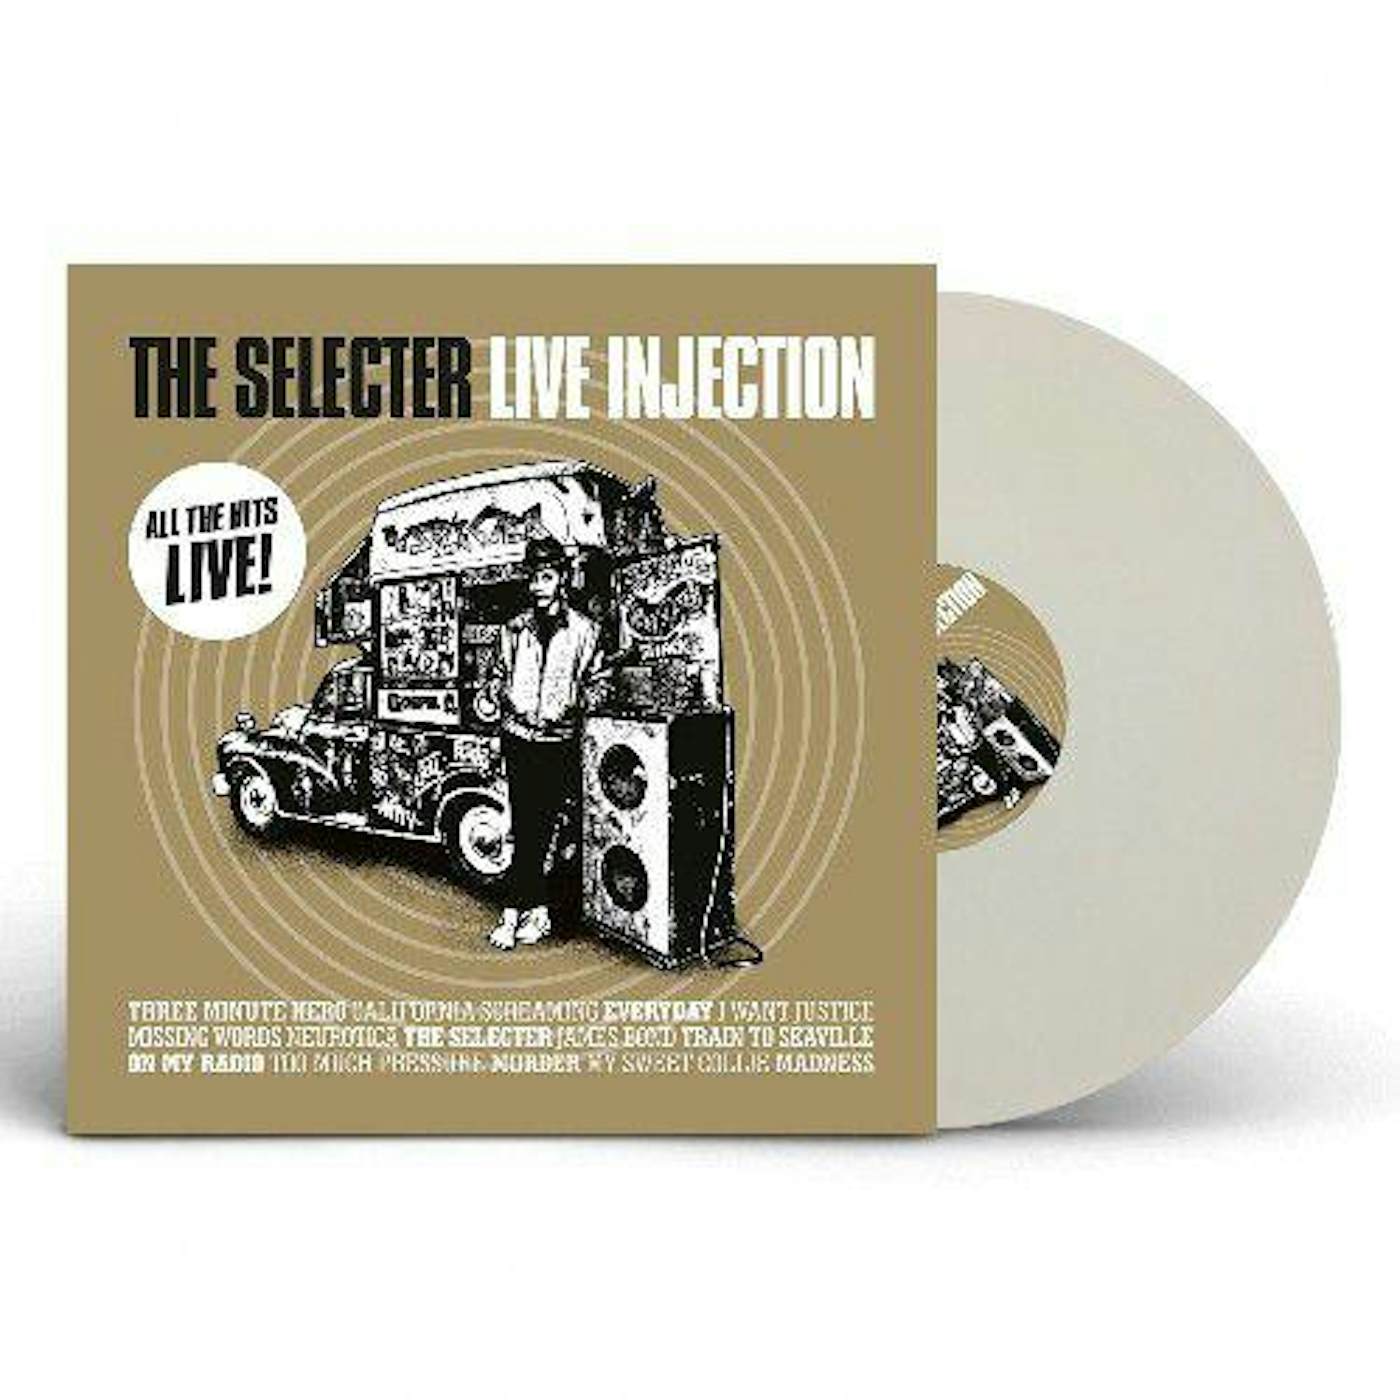 Selecter Live Injection (White Vinyl Record)